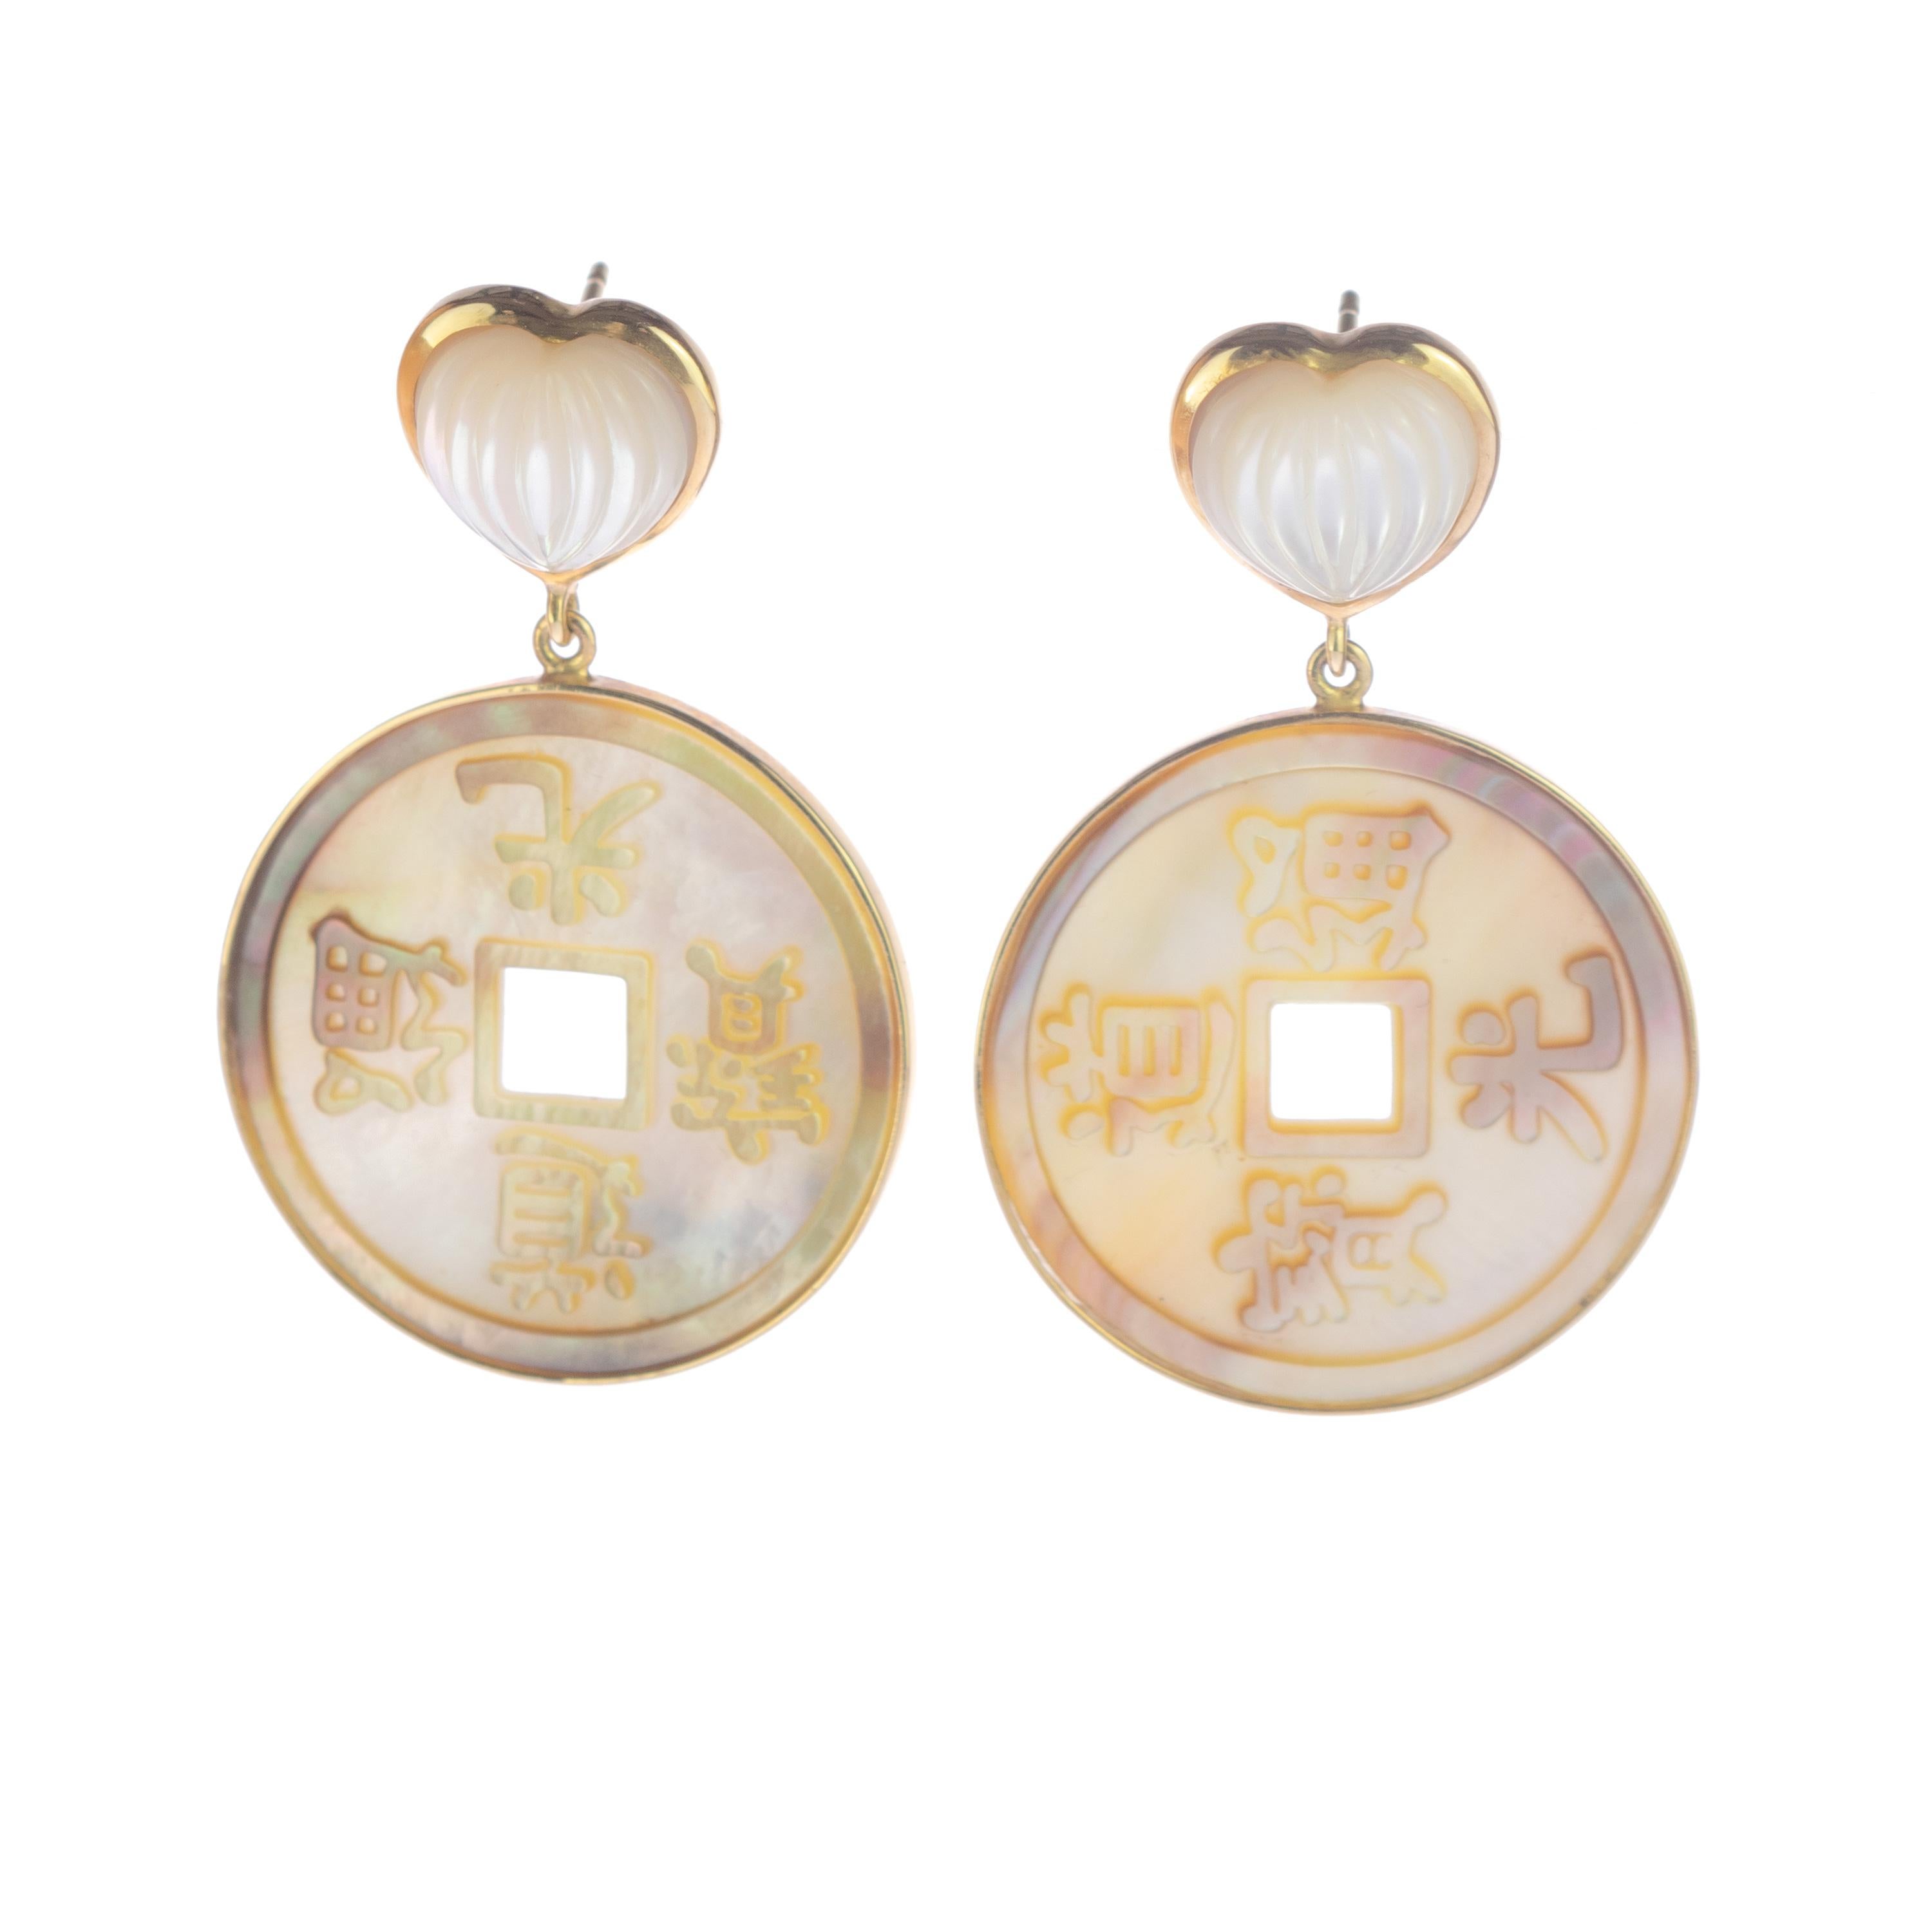 Artisan earrings setted in 18 karat yellow gold that holds a perfectly crafted heart shaped mother of pearl earrings that hold a round mother of pearl chinese coin design. The chinese symbols of love, wisdom, success and hope are enhanced by the